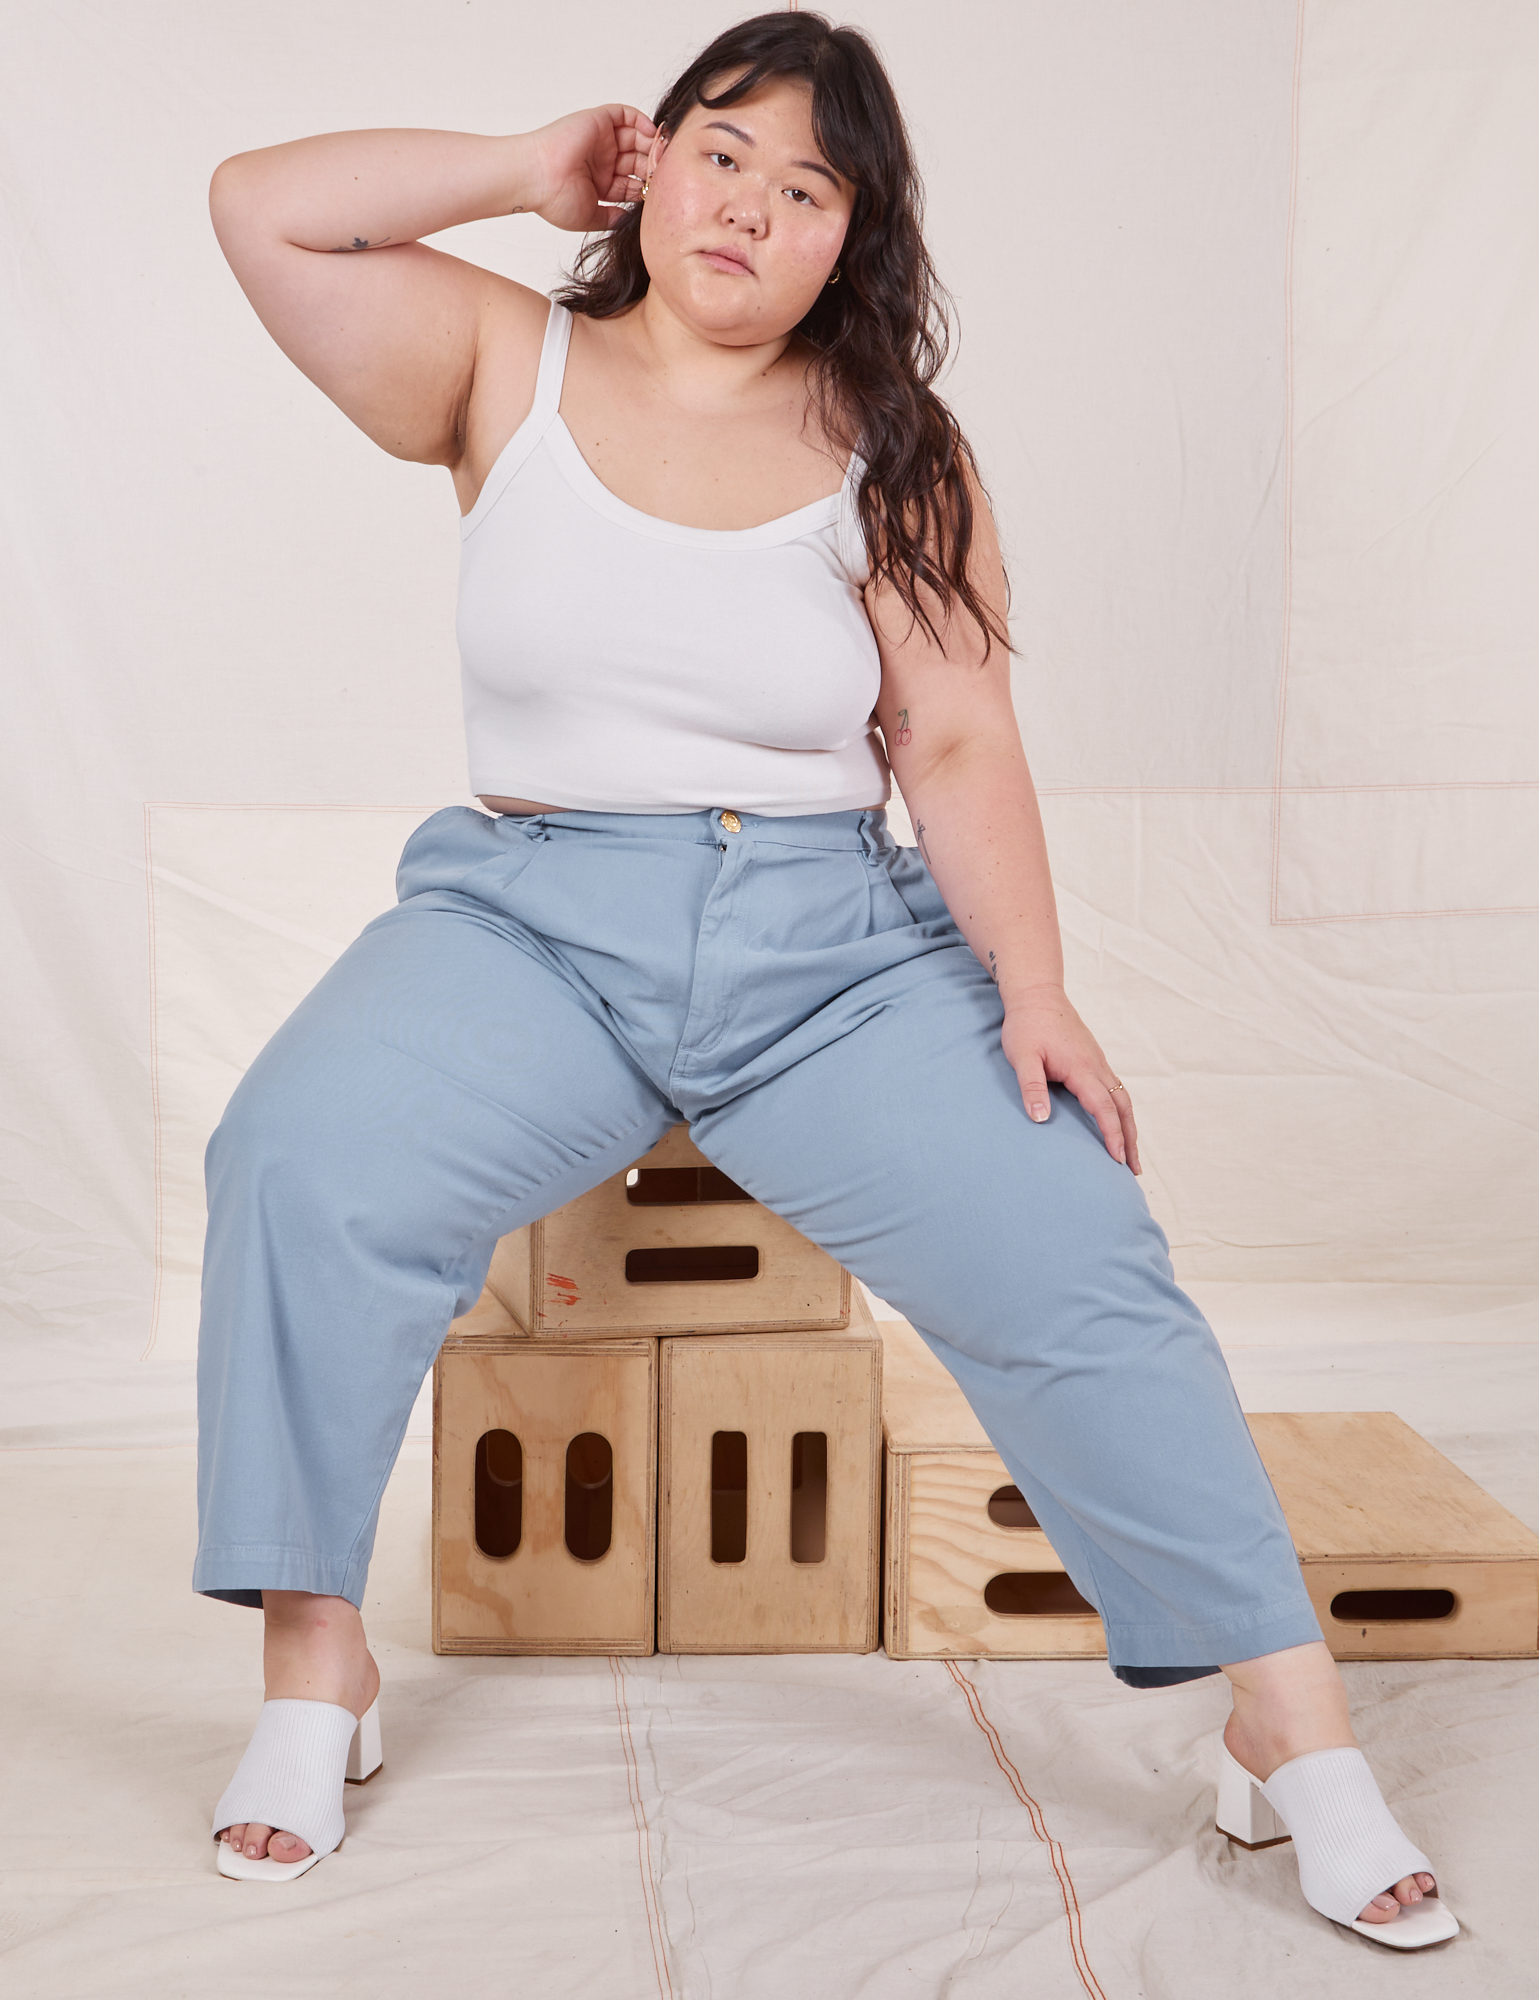 Ashley is wearing Heavyweight Trousers in Periwinkle and Cropped Cami in vintage tee off-white